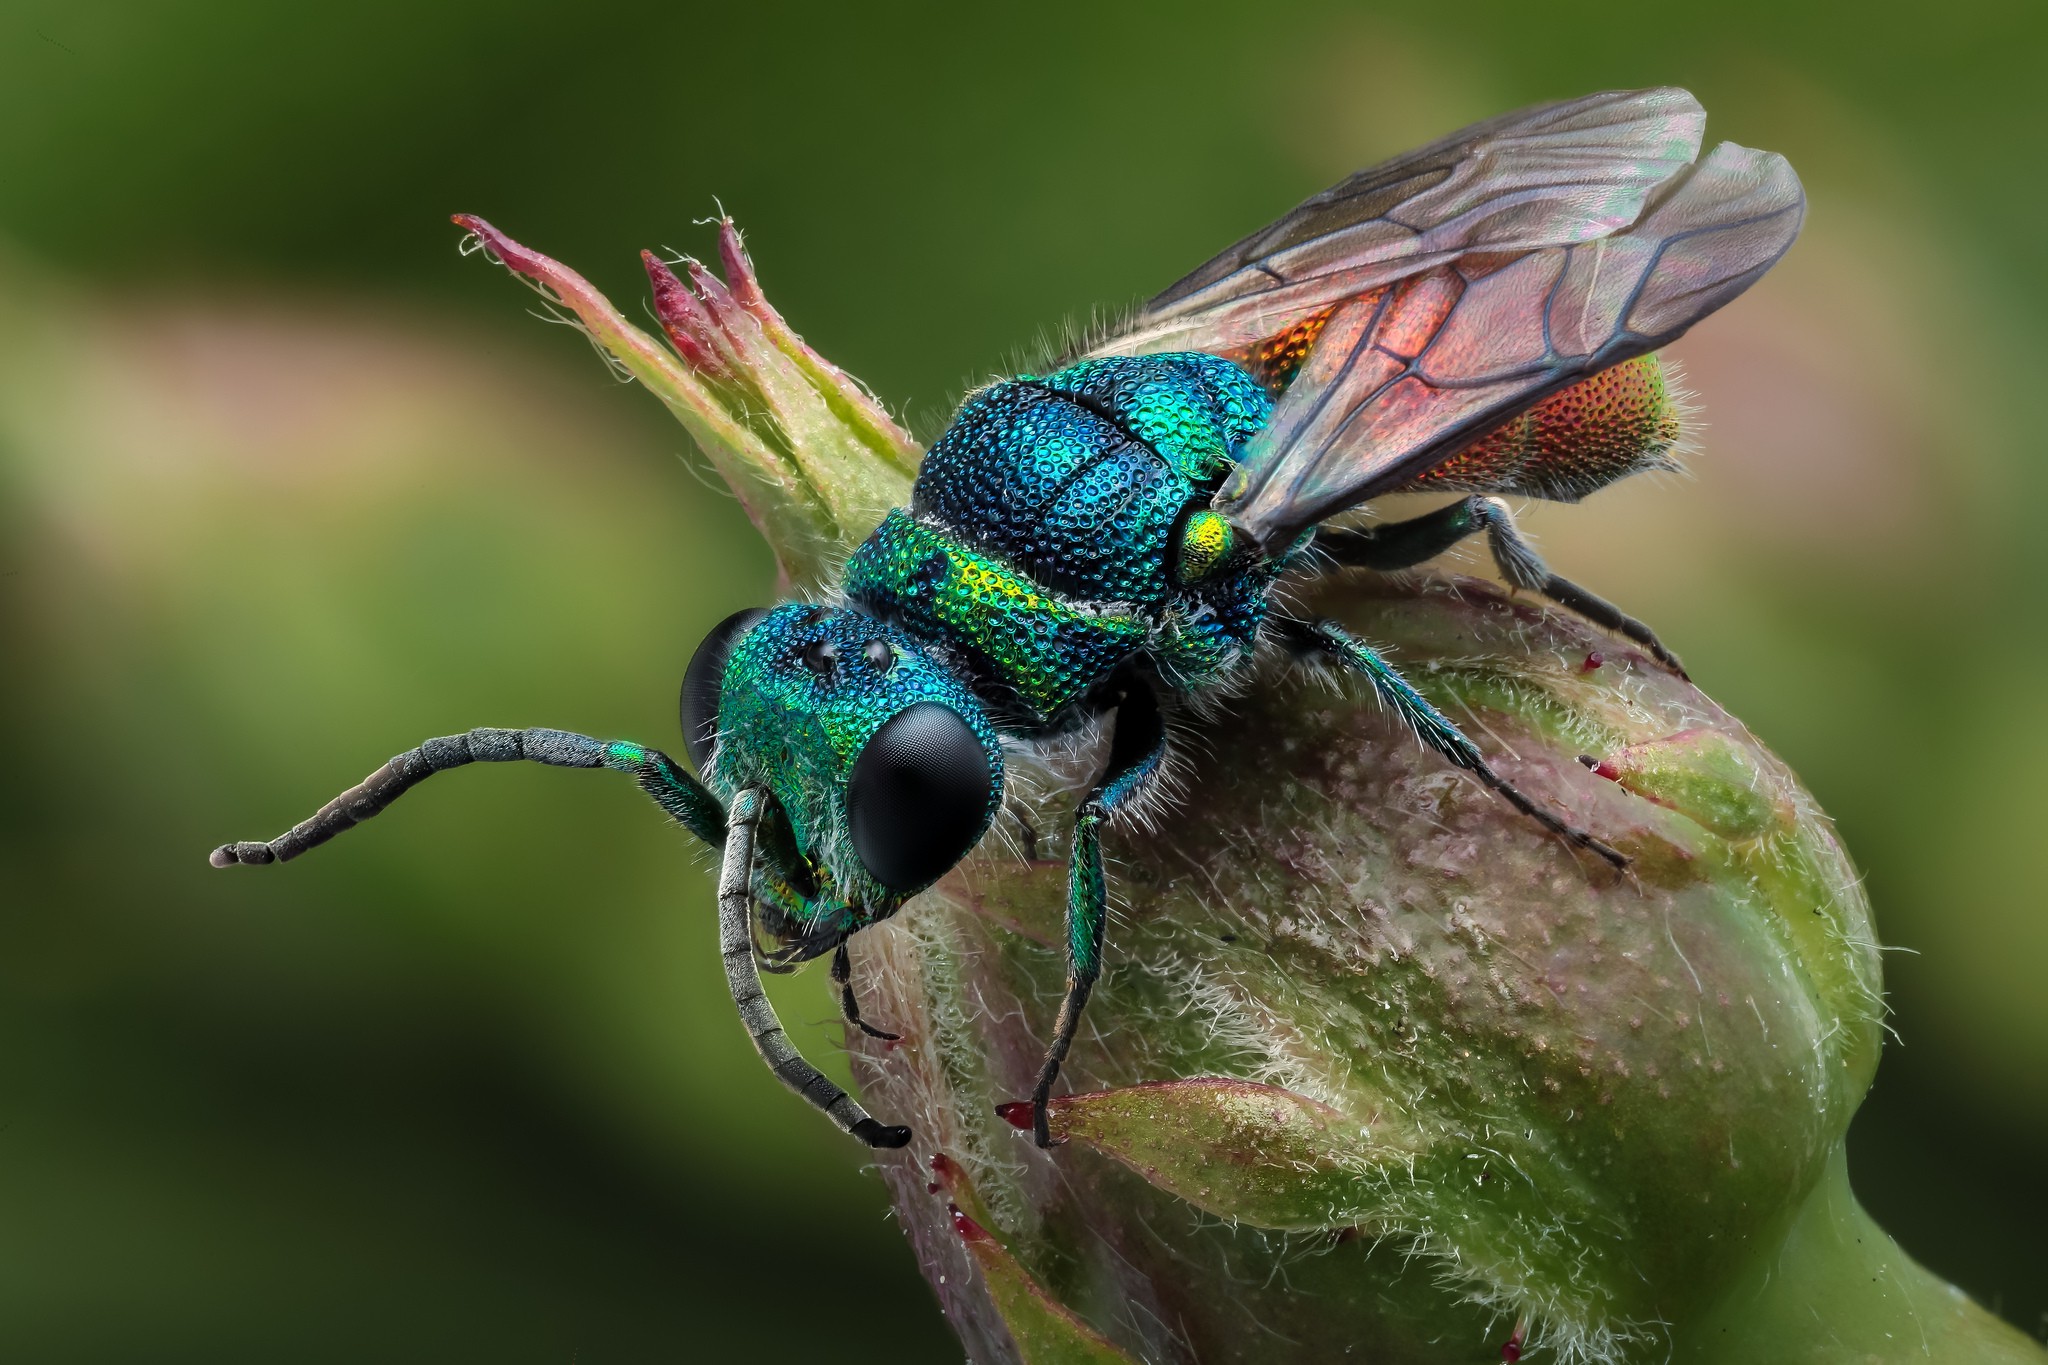 insect wallpaper,insect,invertebrate,cuckoo wasps,macro photography,pest